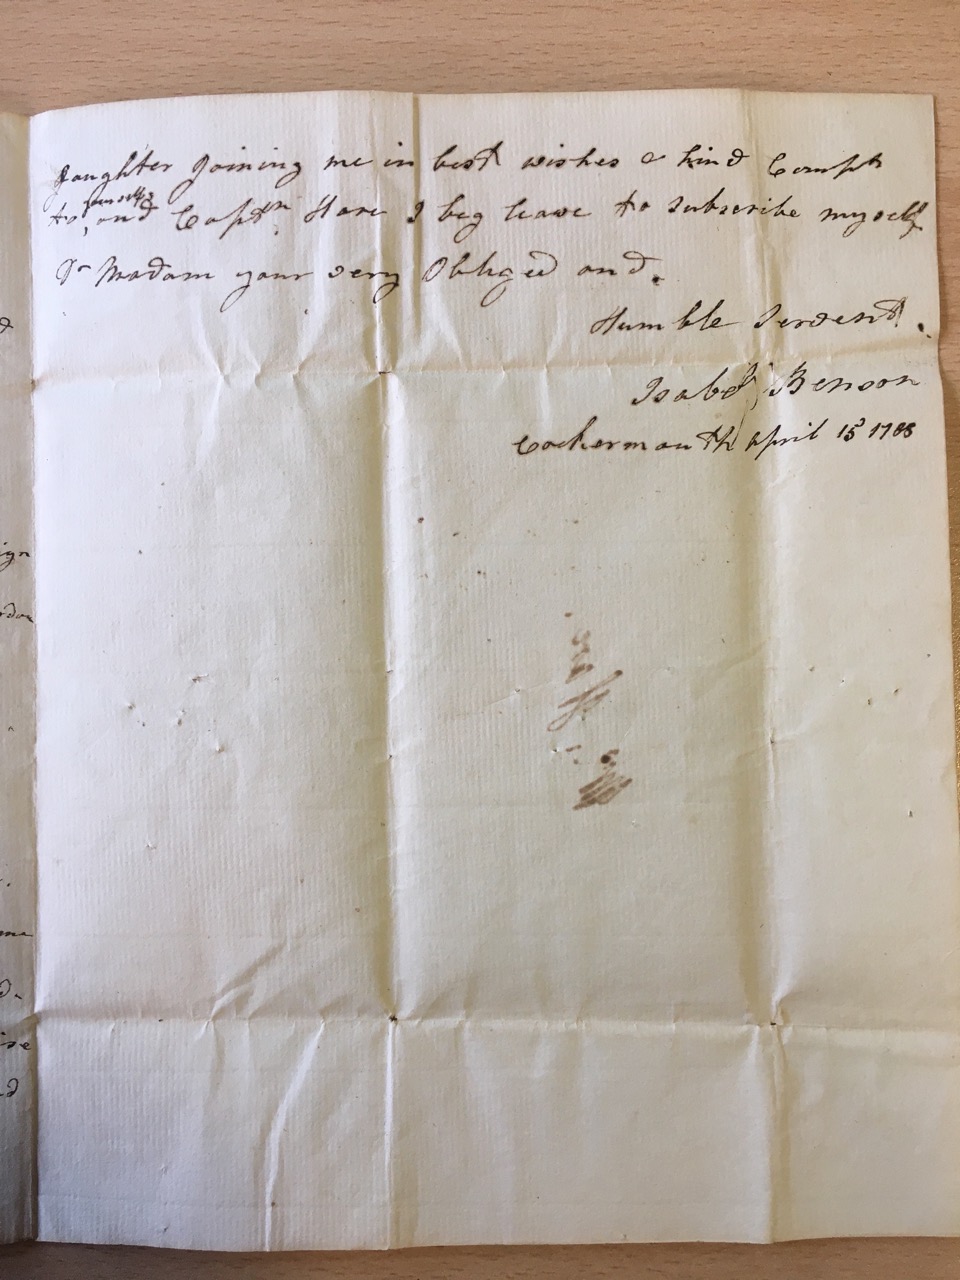 Image #3 of letter: Isabella Benson to Ann Hare, 15 April 1785